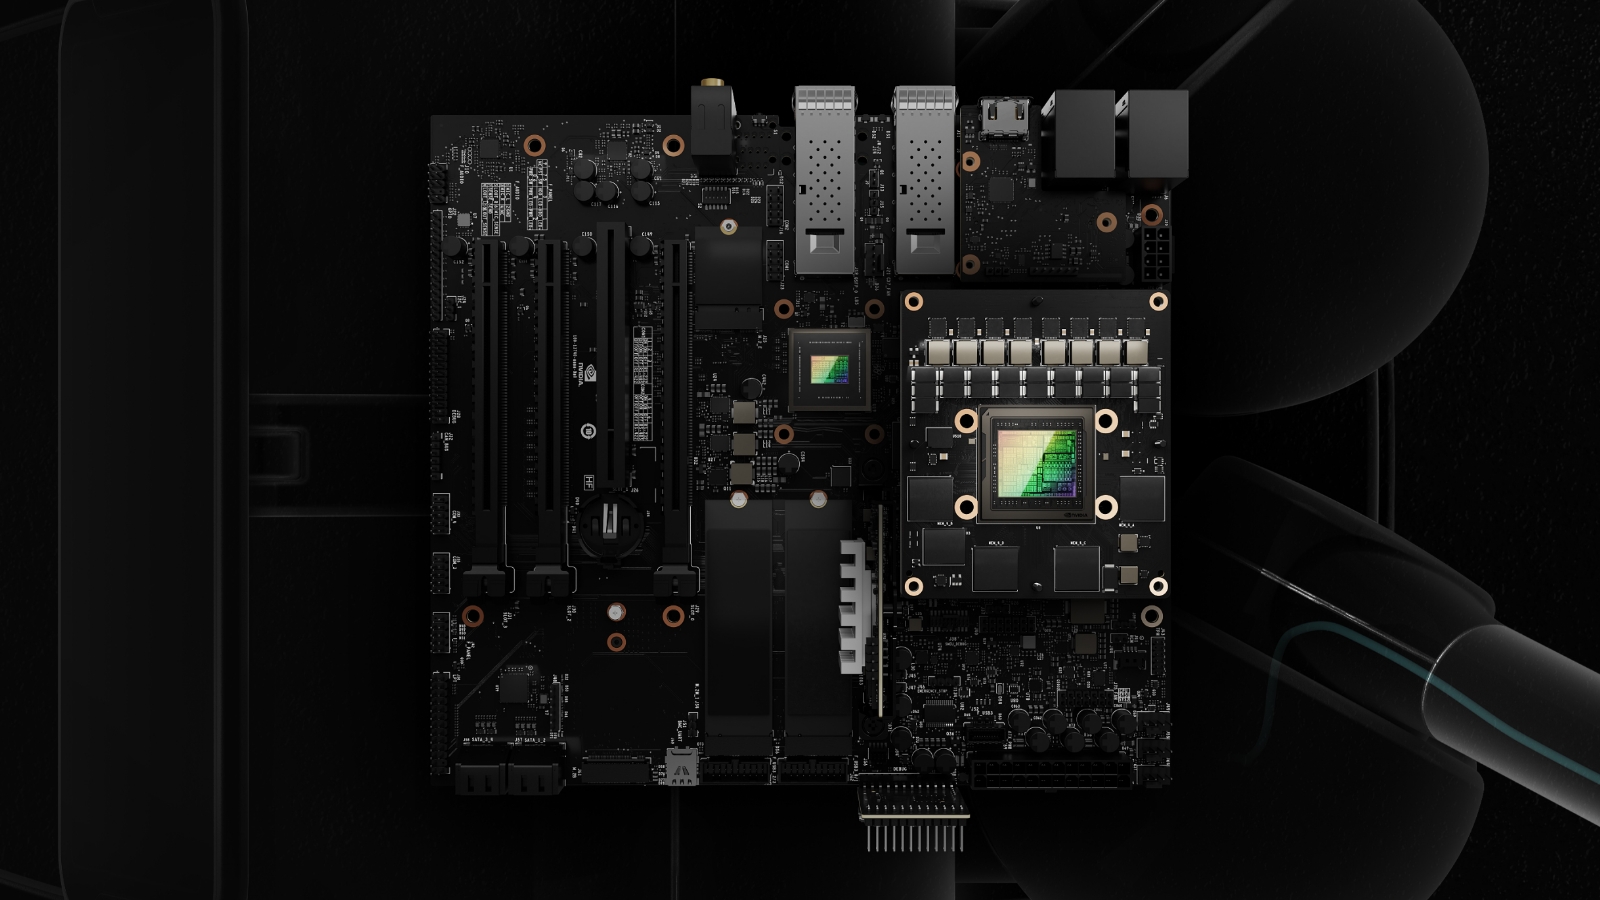 Nvidia has brought IGX edge AI developer kit for industrial applications